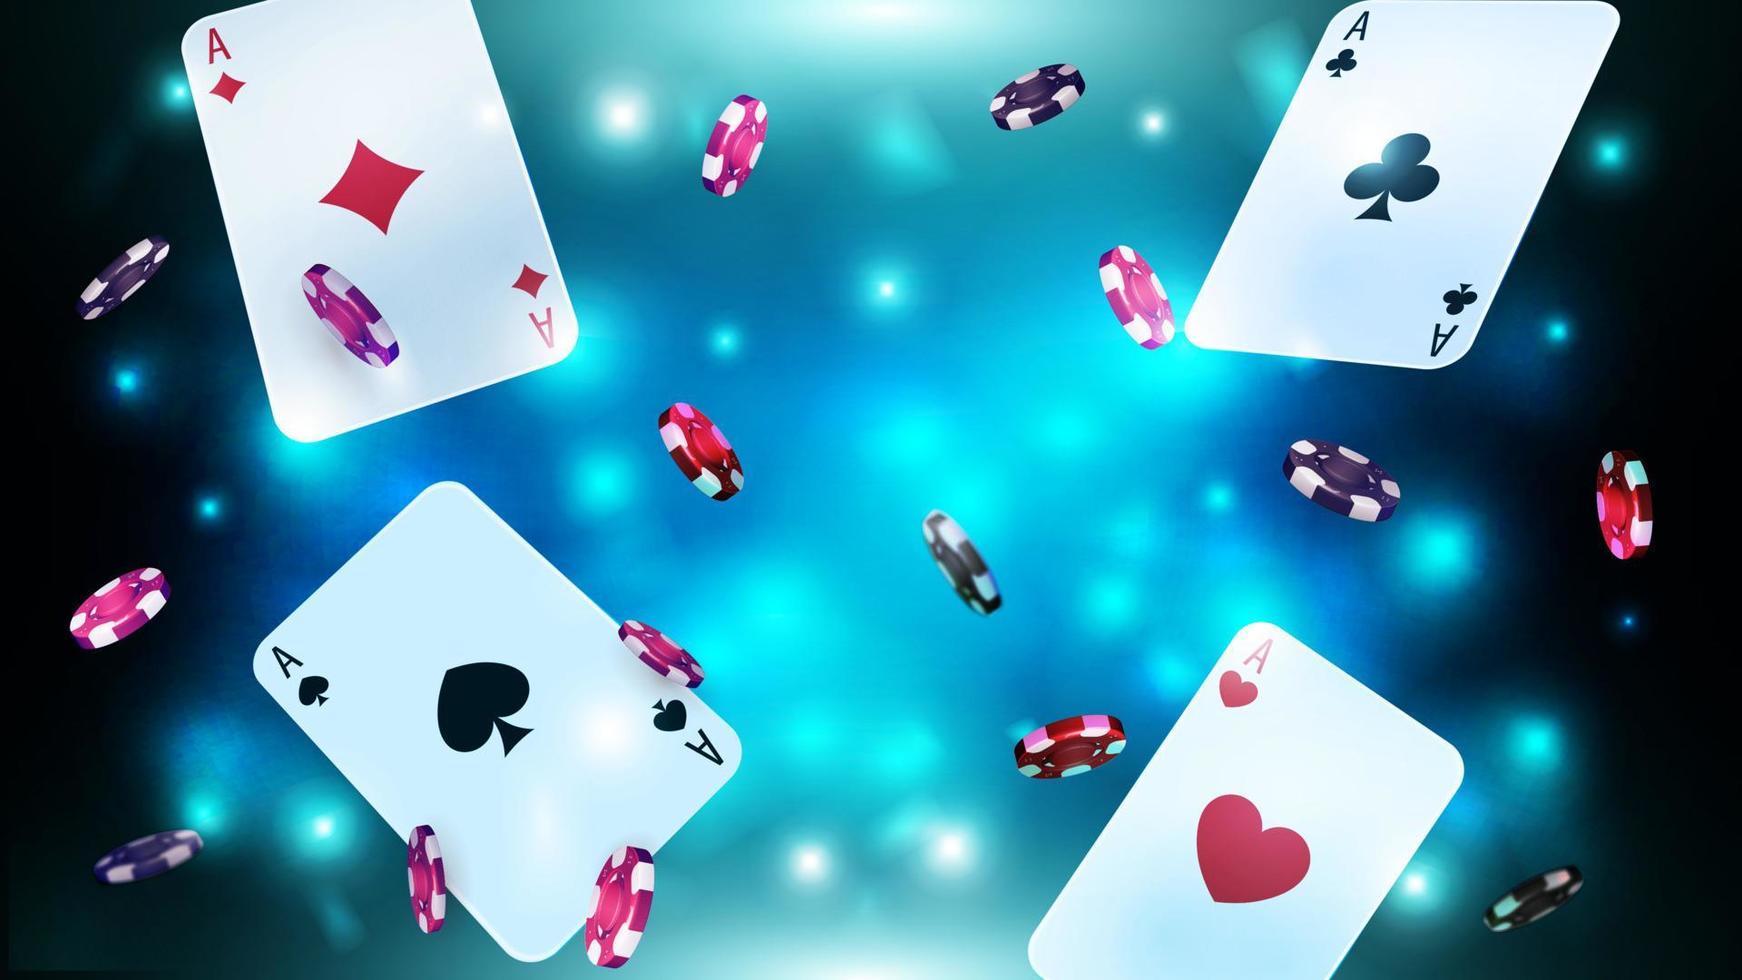 Blue shiny blurred background with flying playing cards and poker chips. vector